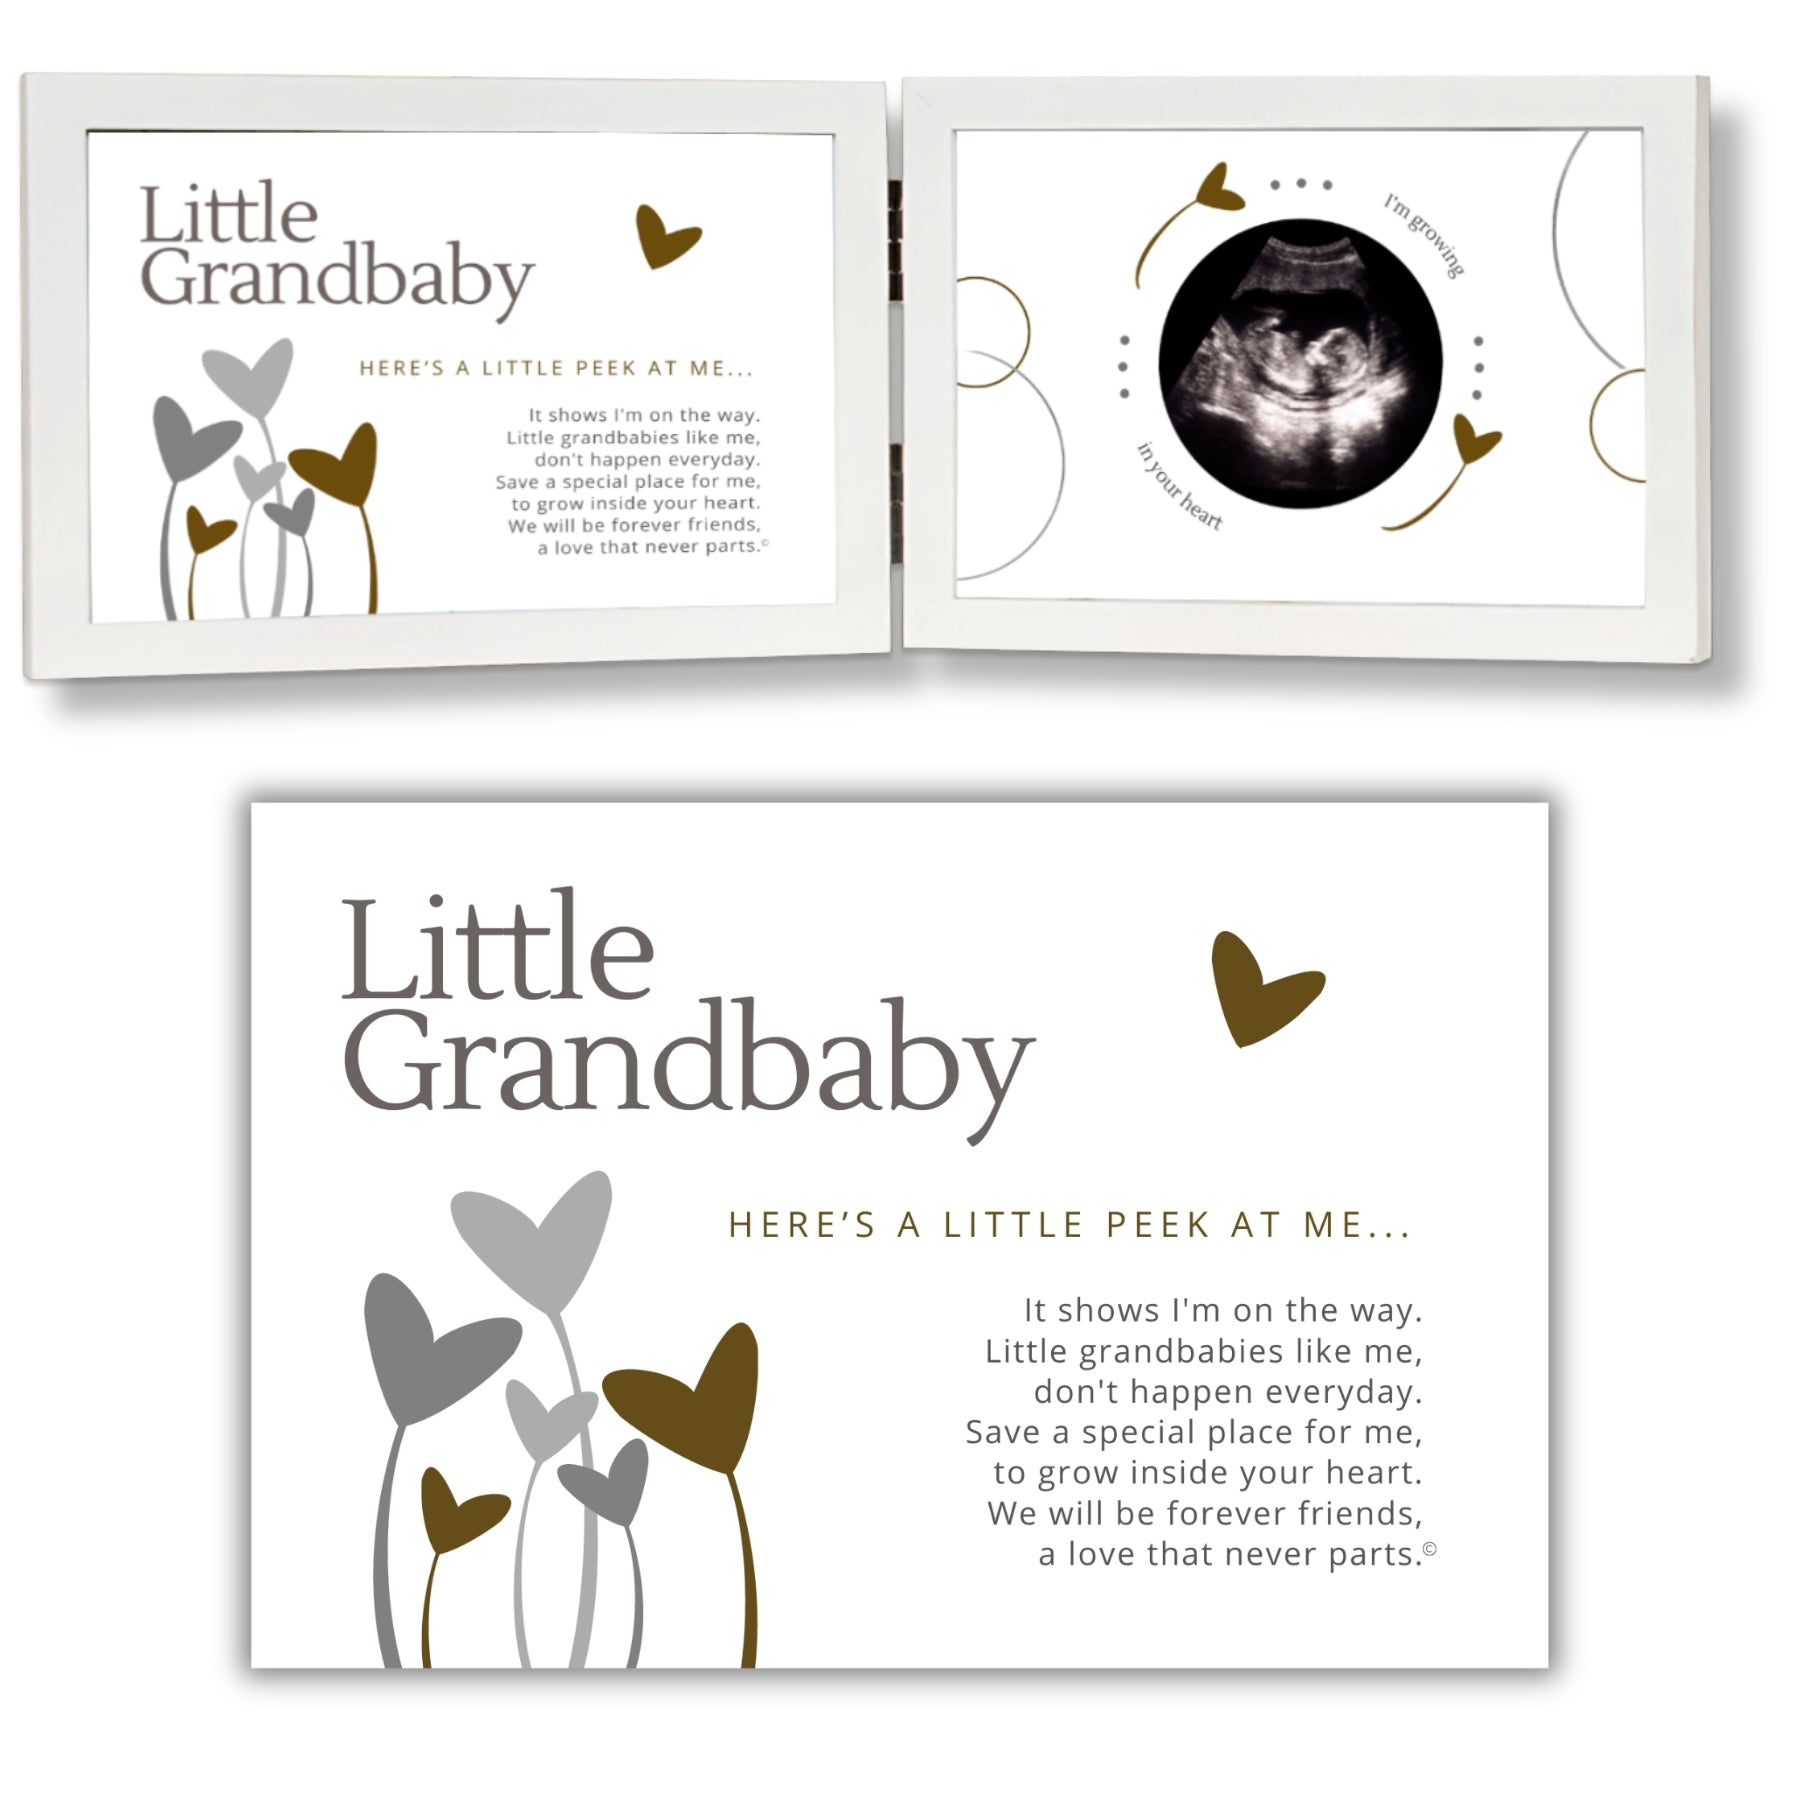 White 4x6 wood double frame with Little Grandbaby Sentiment on the left side and artwork with a 2.5" circle for an ultrasound picture on the right side. A larger image of the Sentiment is shown below the frame.